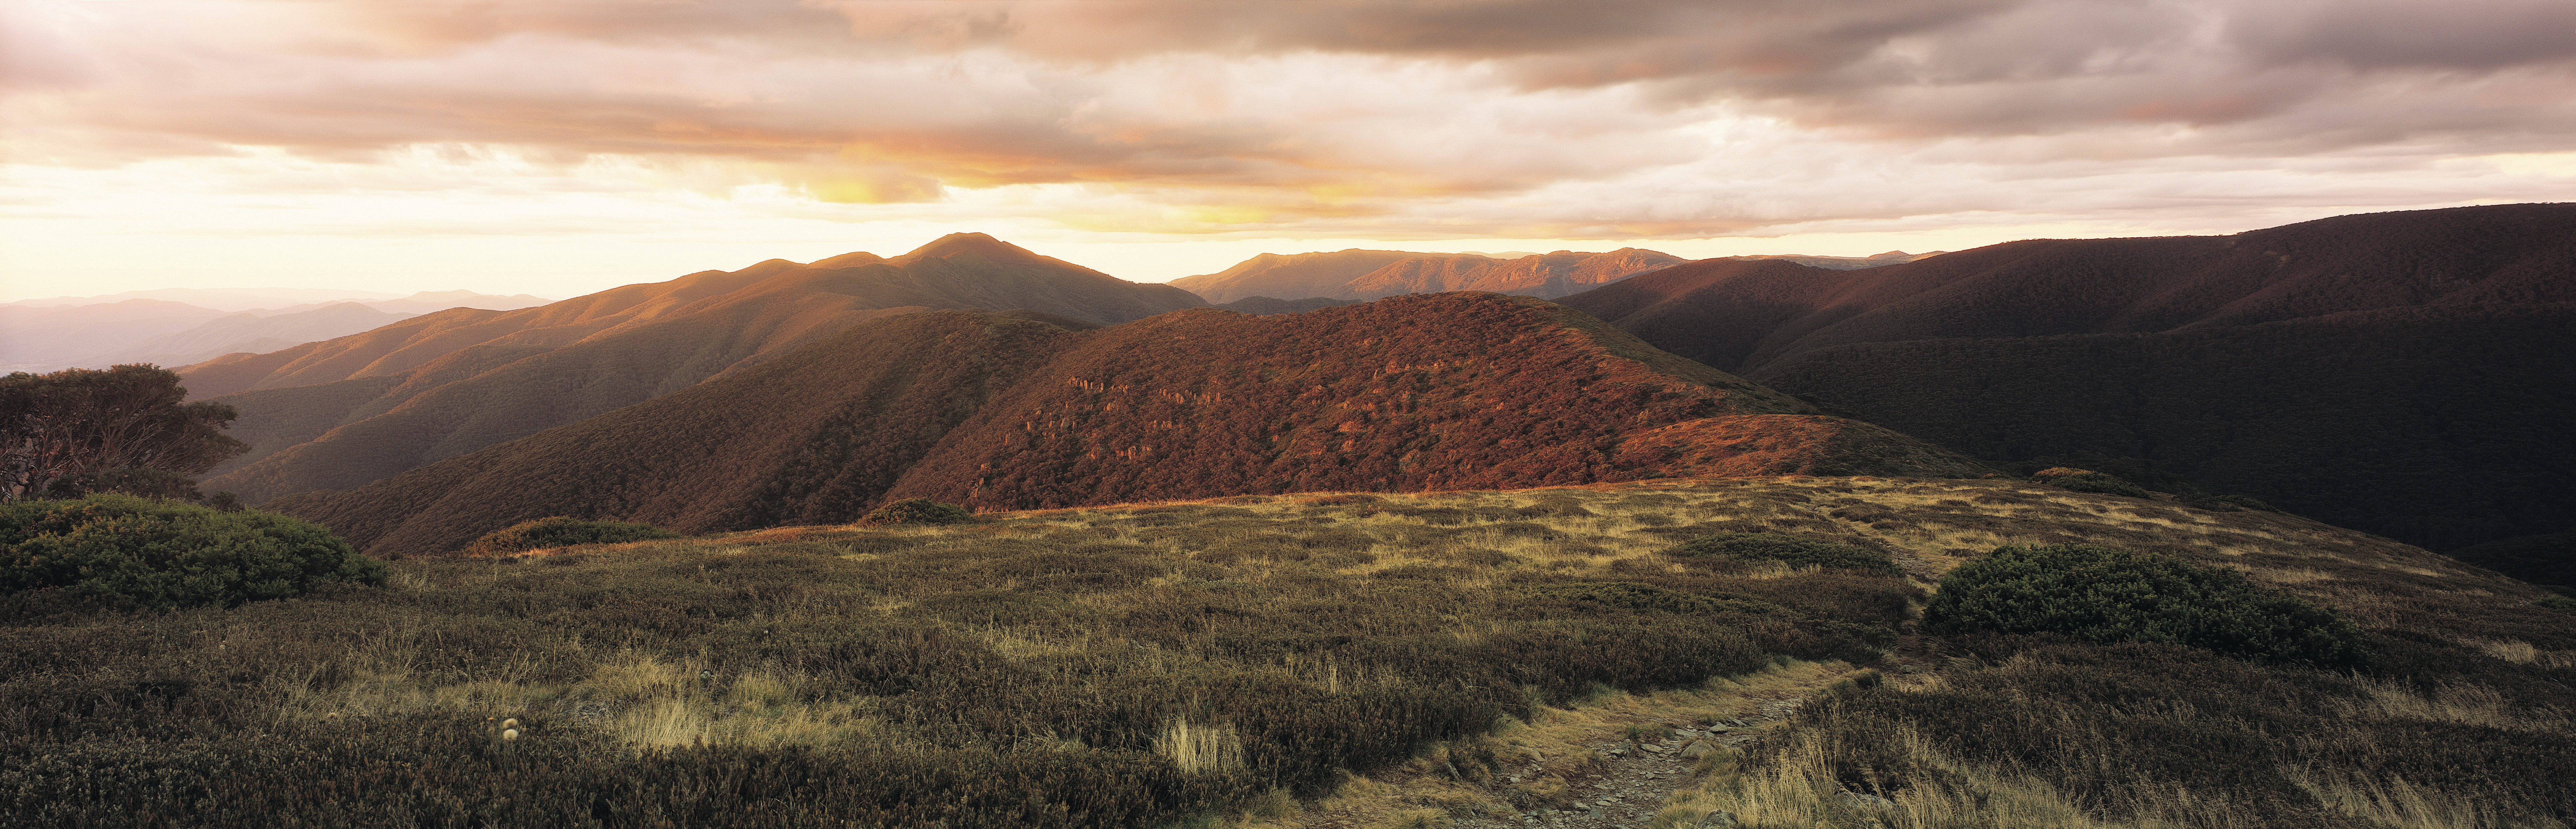 Panoramic view from Razorback in the Victorian Alpine region